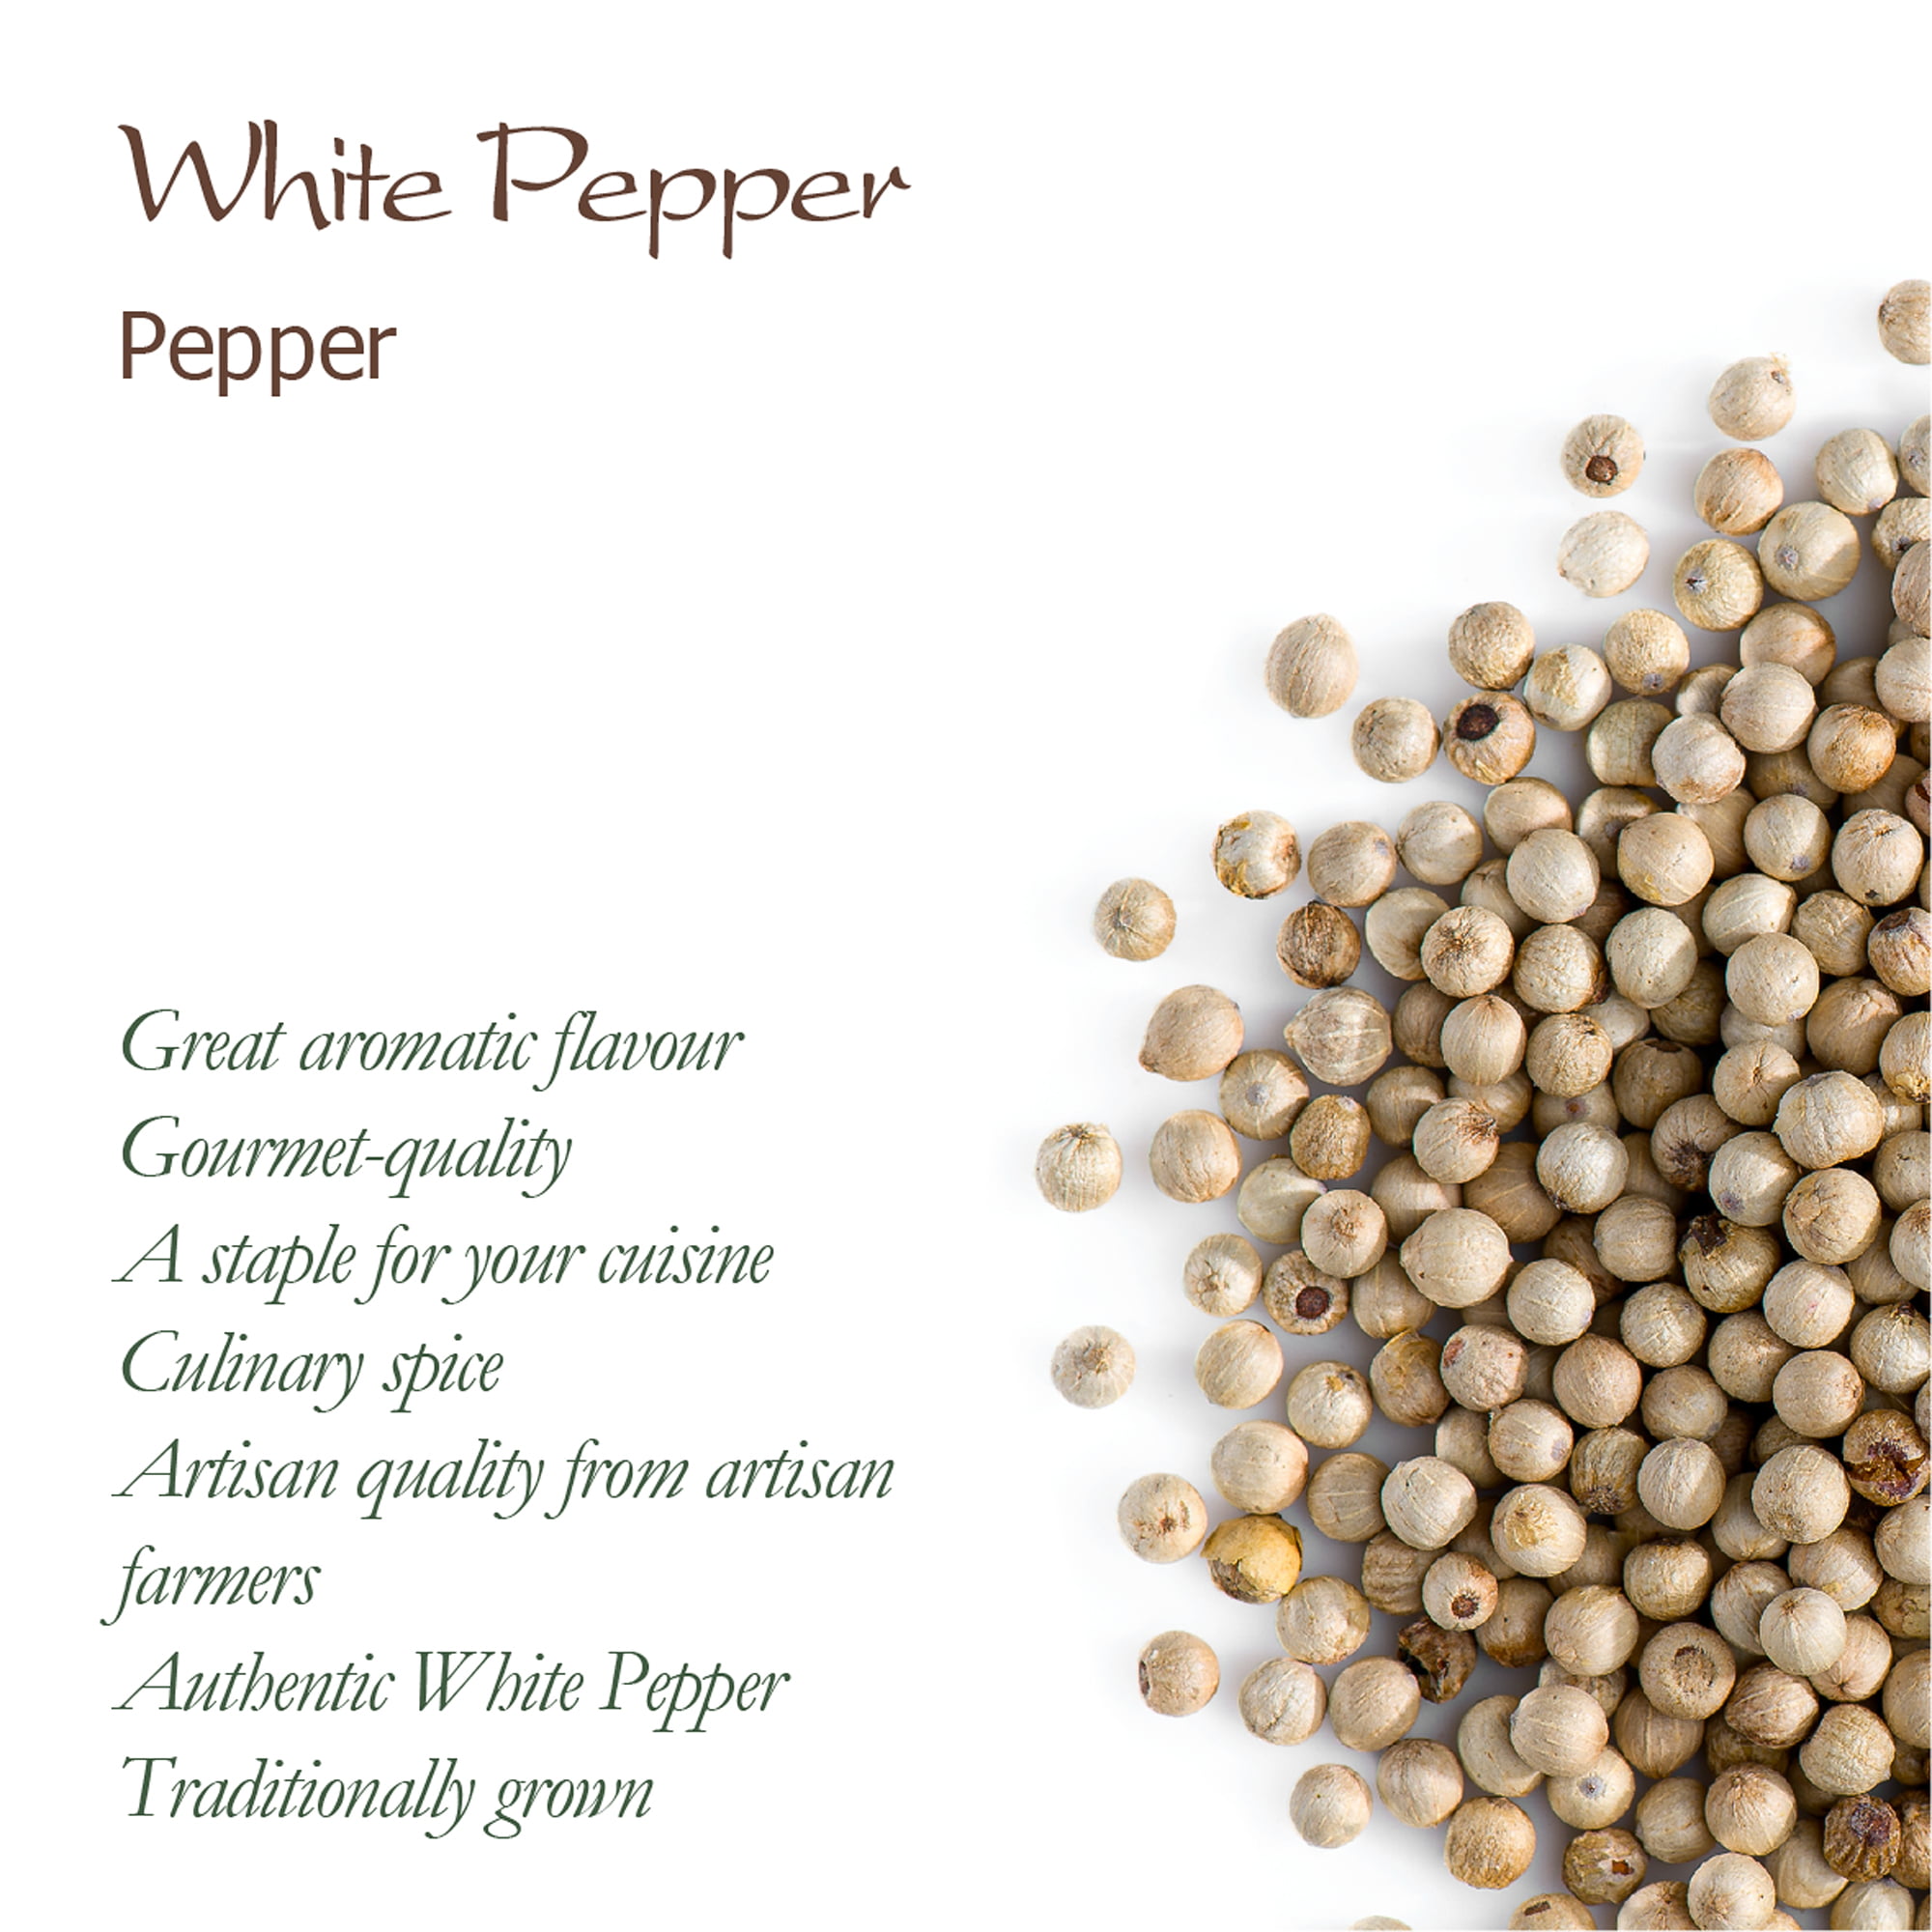 White Pepper vs. Black Pepper: What's the Difference?